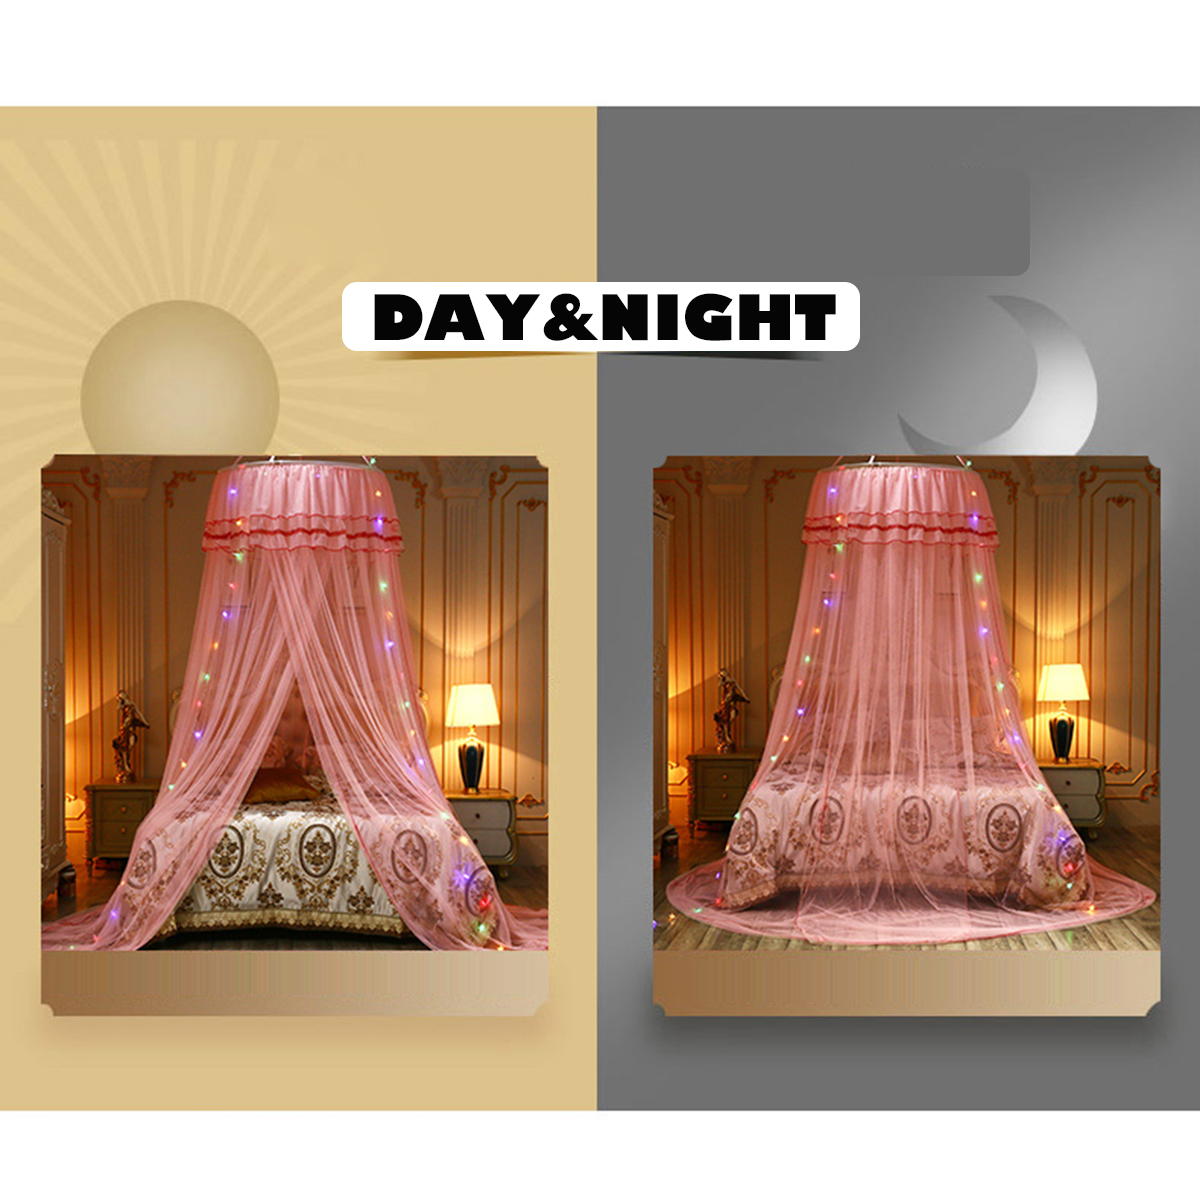 Mosquito-Net-Bedding-Lace-LED-Light-Princess-Dome-Mesh-Bed-Canopy-Bedroom-Decor-1682937-9